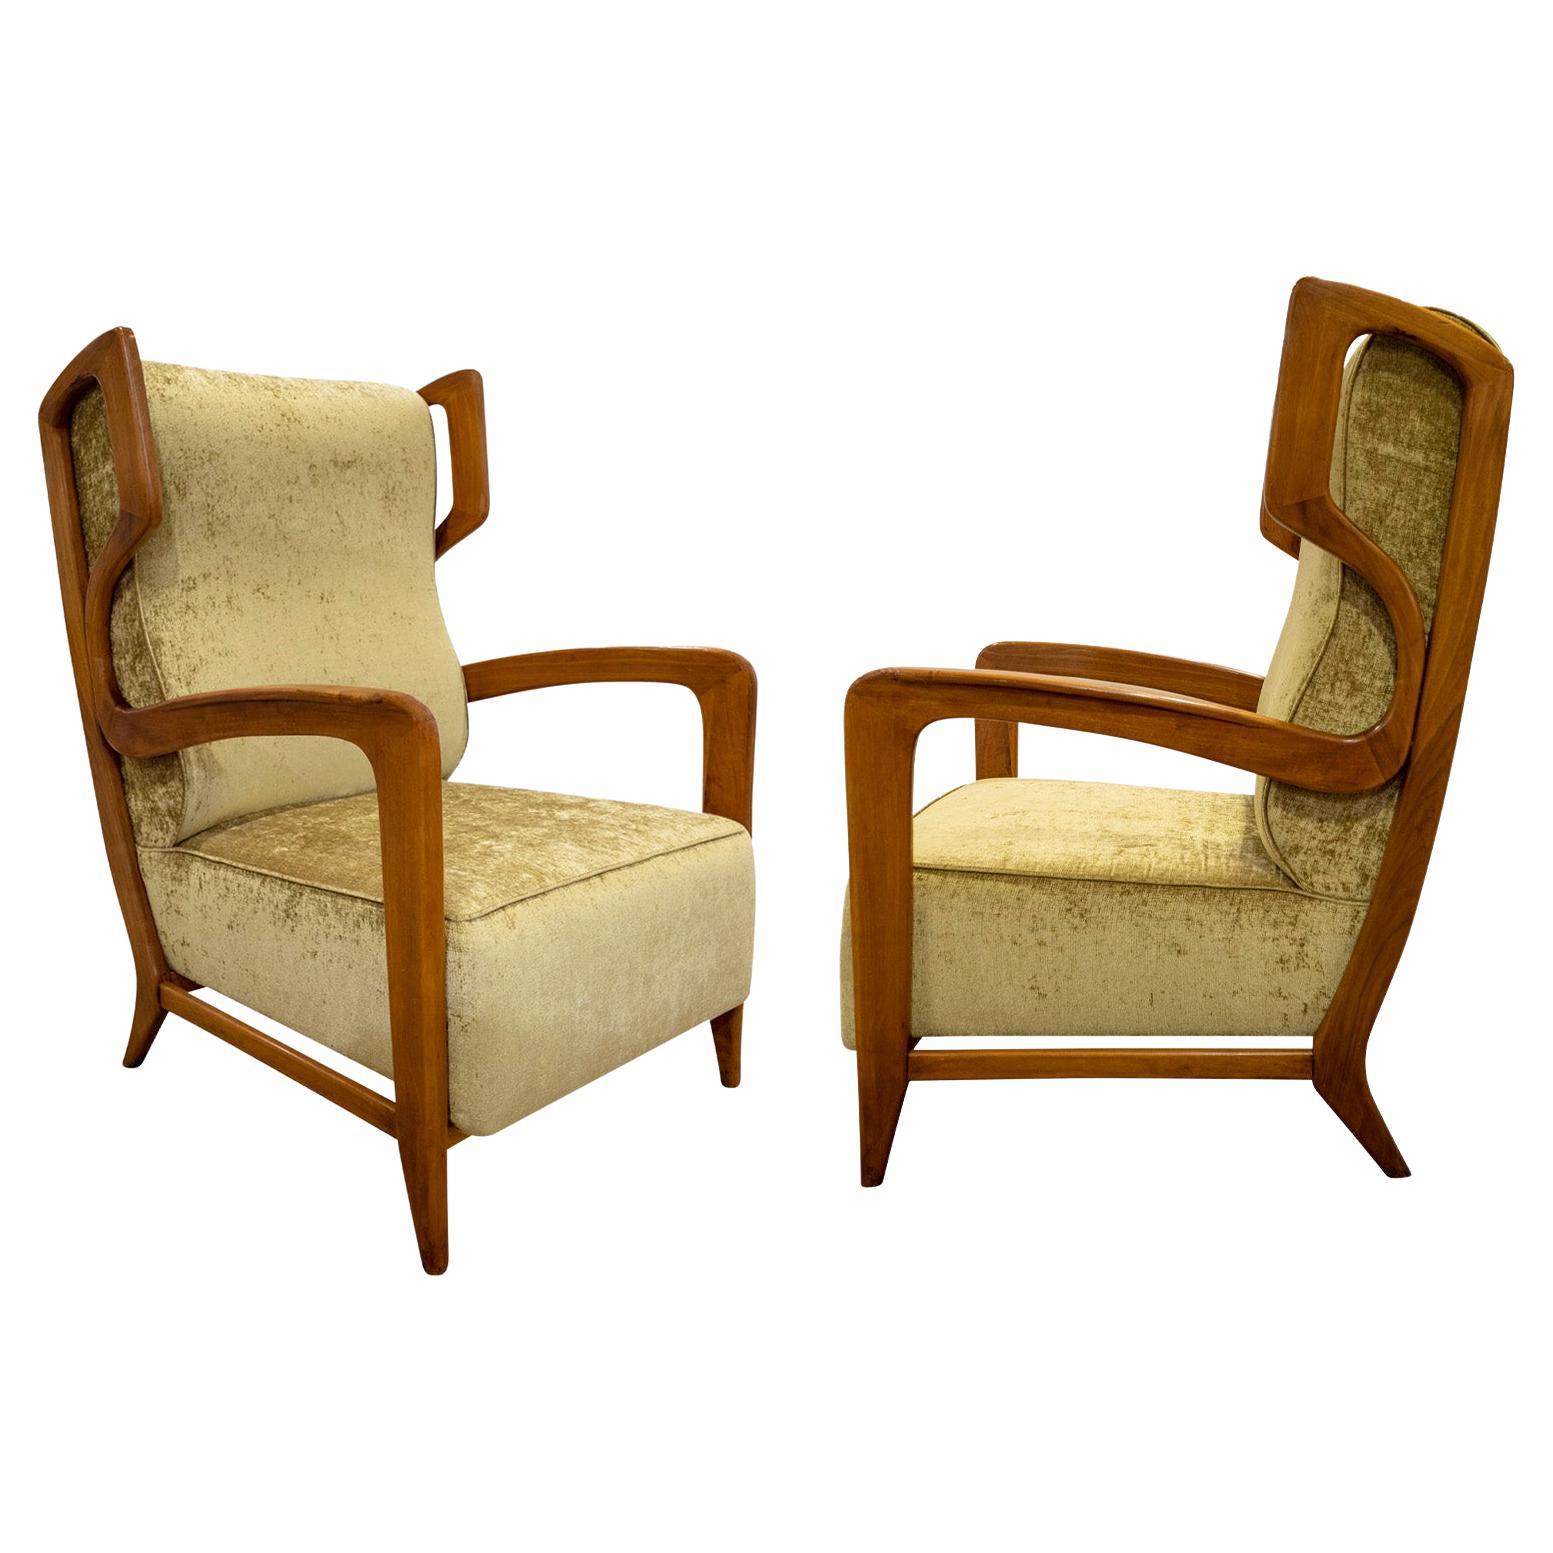 Gio Ponti Rare Pair of Lounge Chairs 1940s 'COA from Ponti Archive'